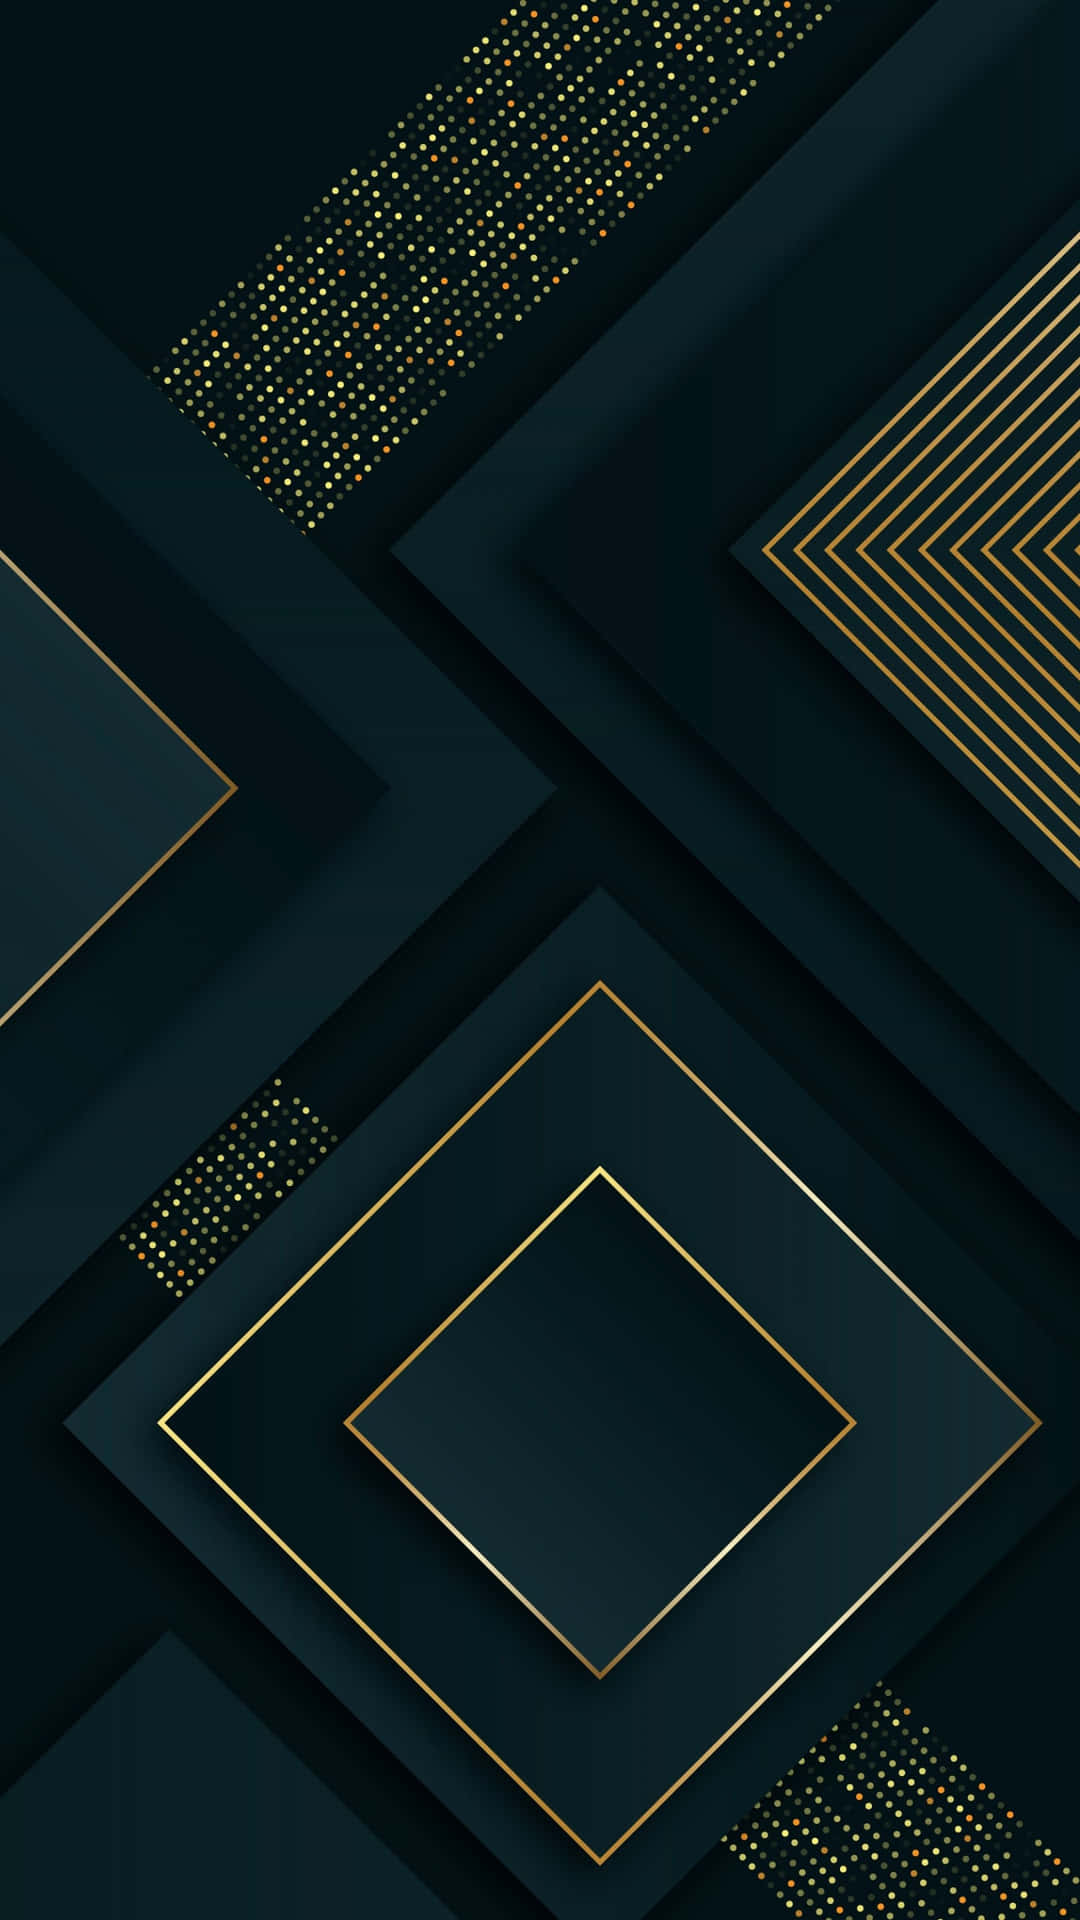 Black And Gold Geometric Background